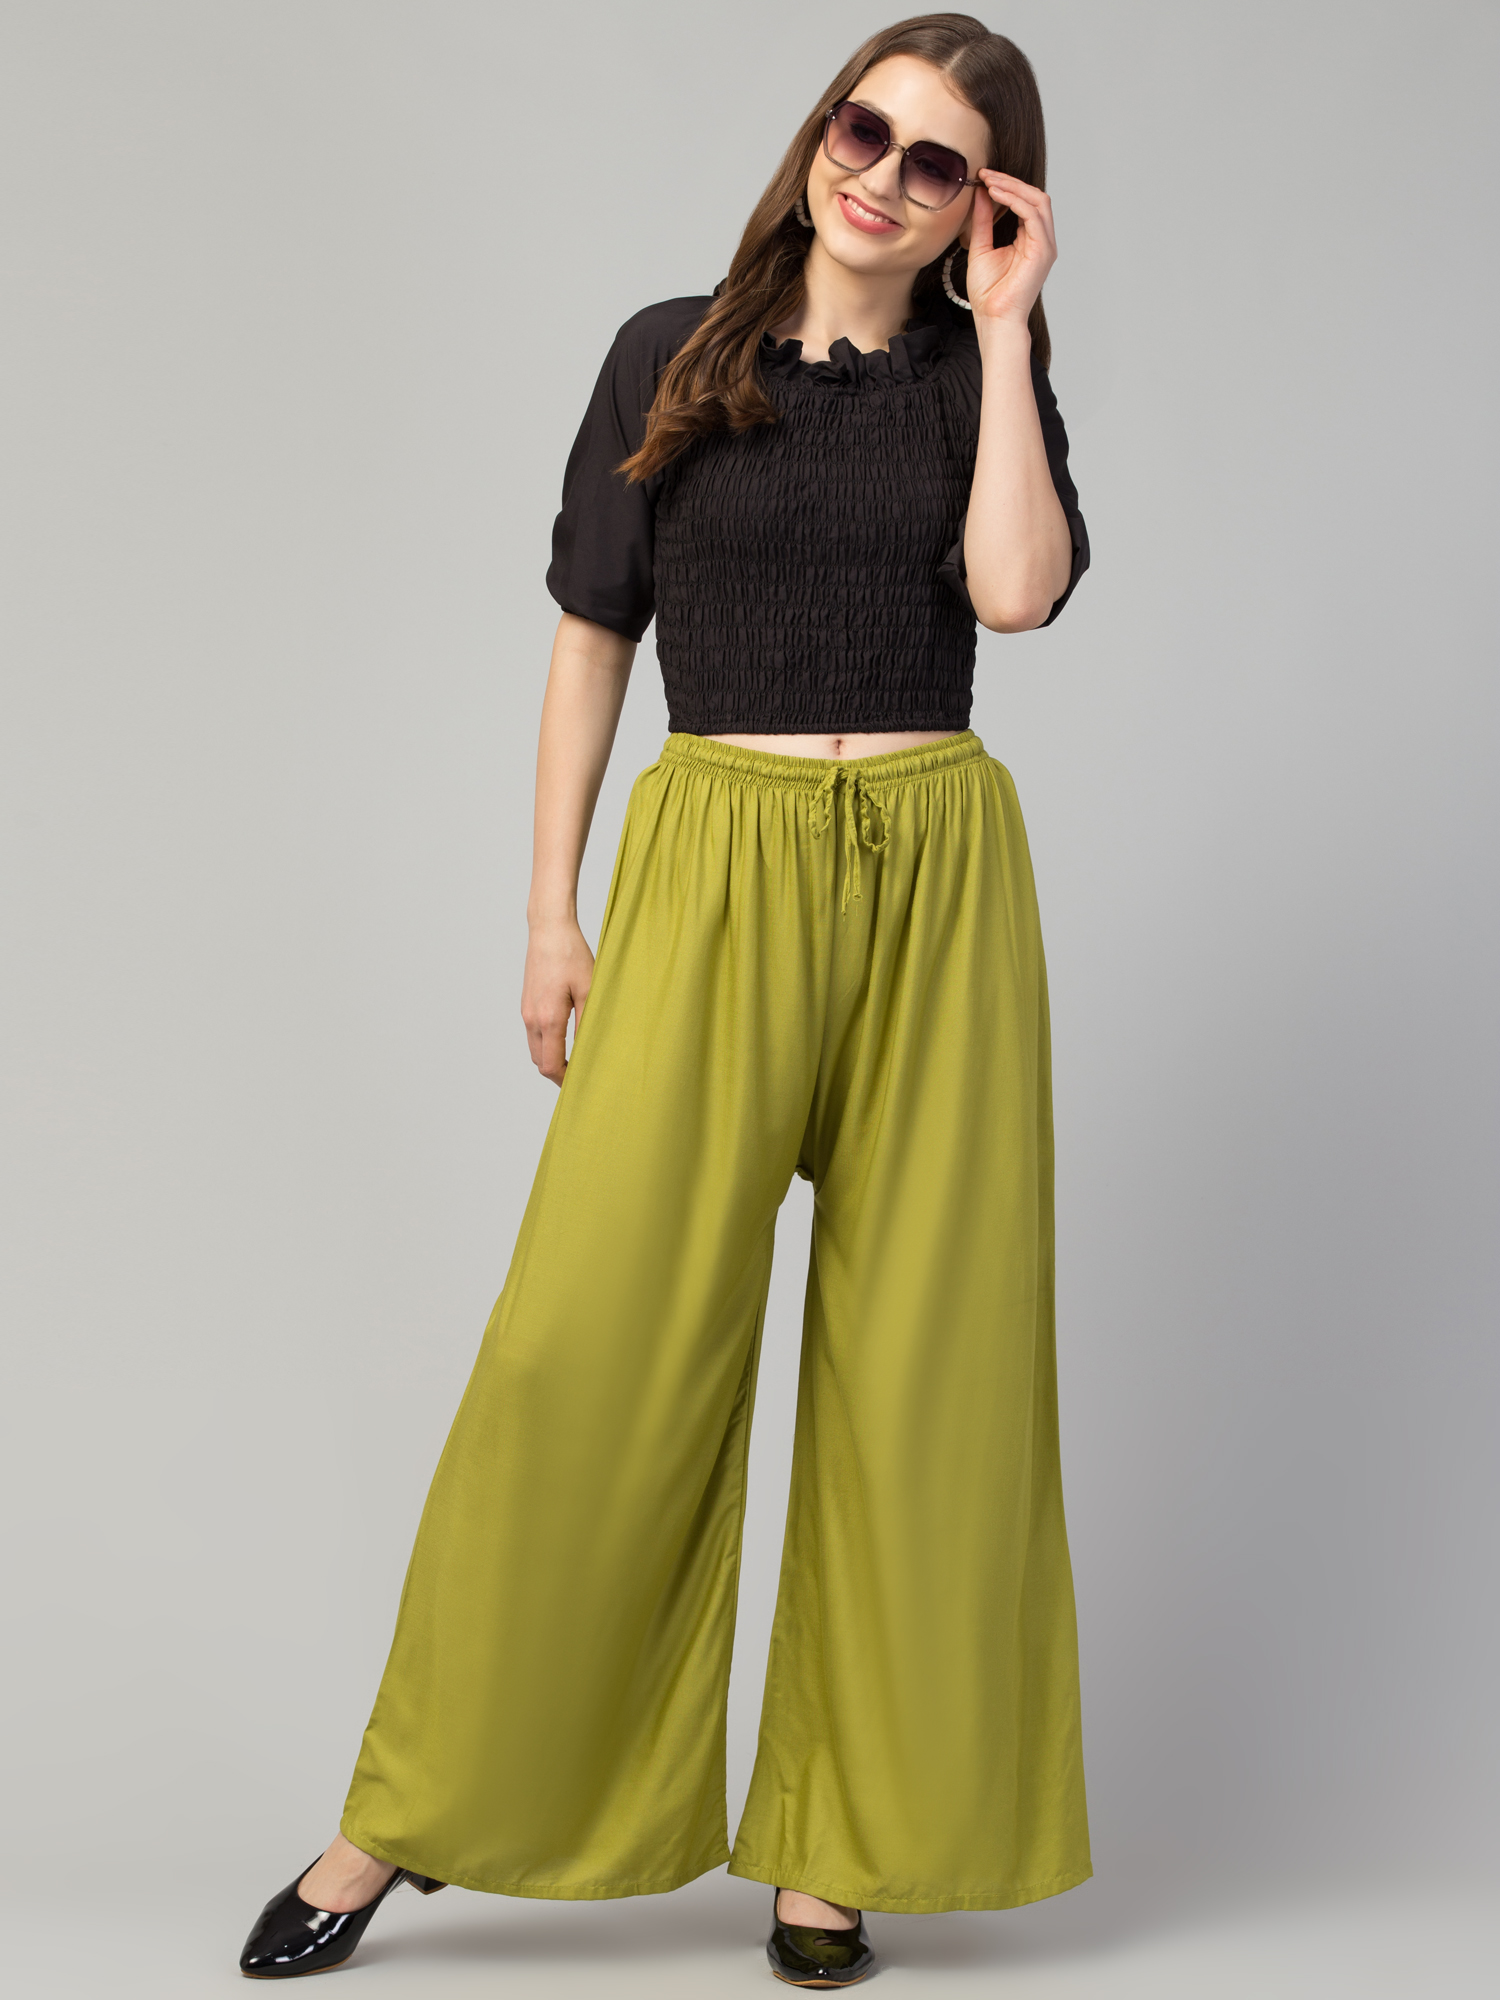 Chic Traditional Outfit Featuring Palazzo Pants and Sequined Blouse